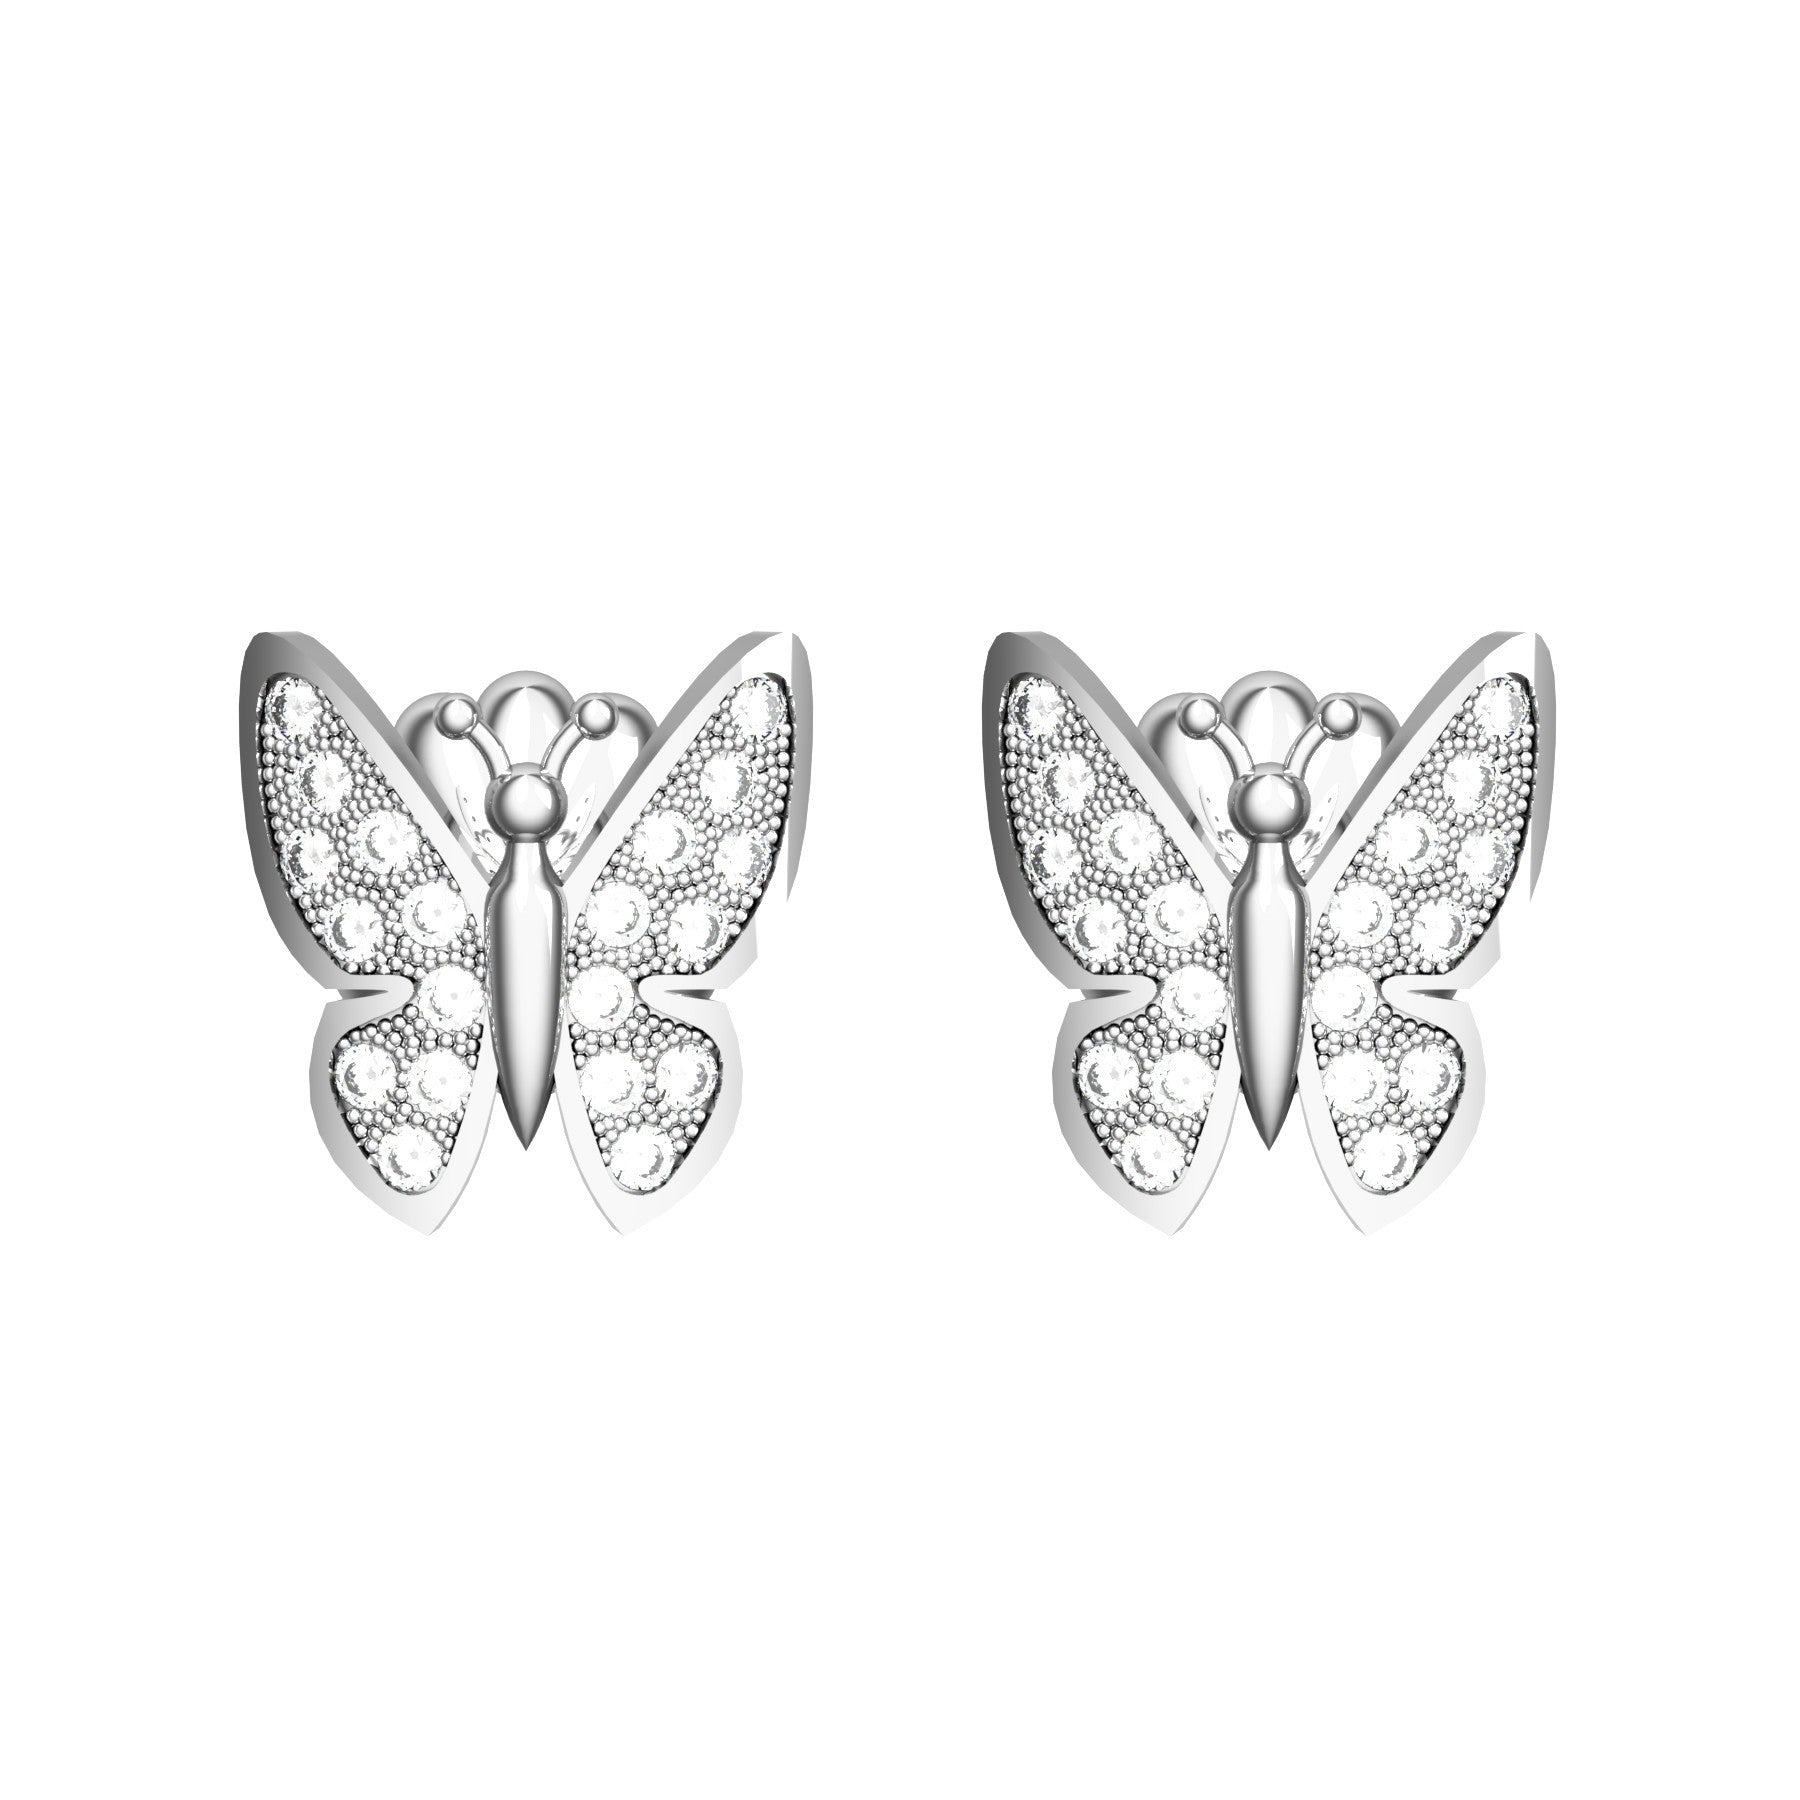 butterfly earrings, natural round diamonds, 18 K white gold, weight about 2,5 g (0.09 oz), size 10x9 mm 